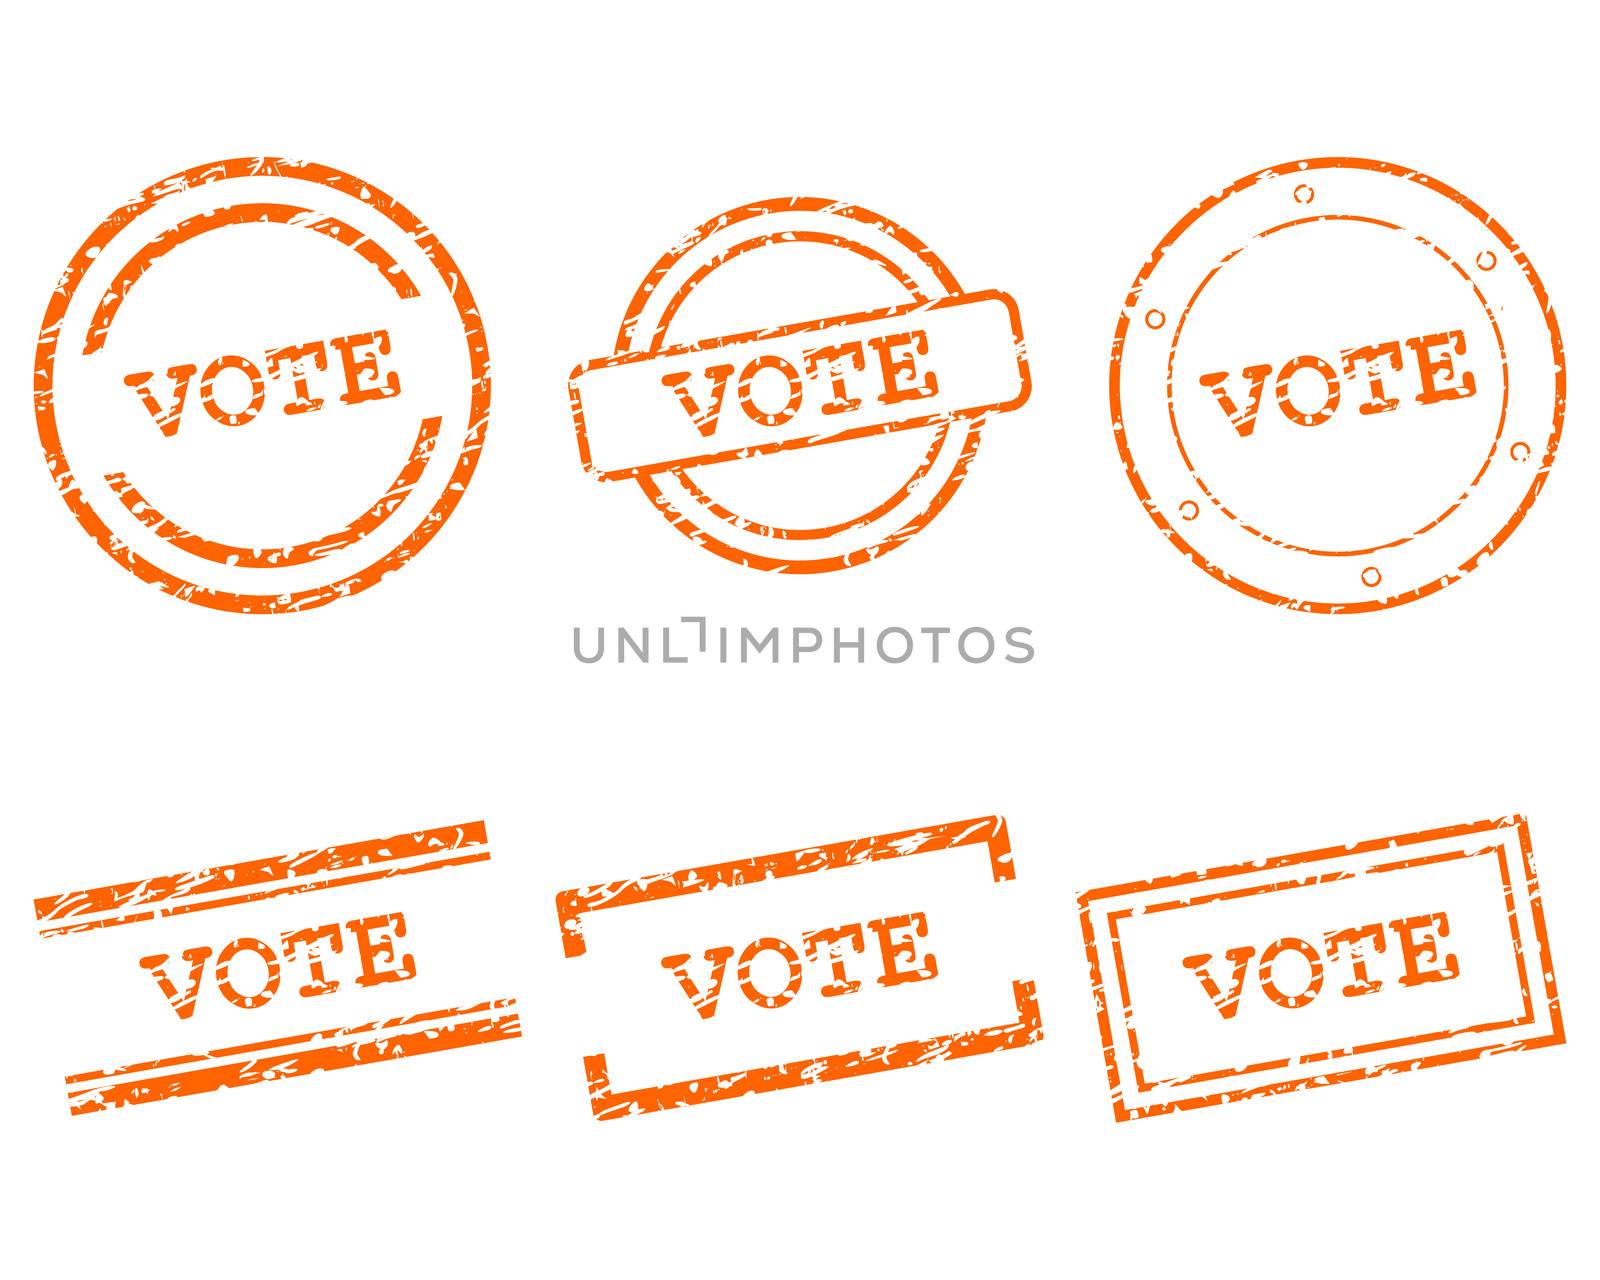 Vote stamps by rbiedermann